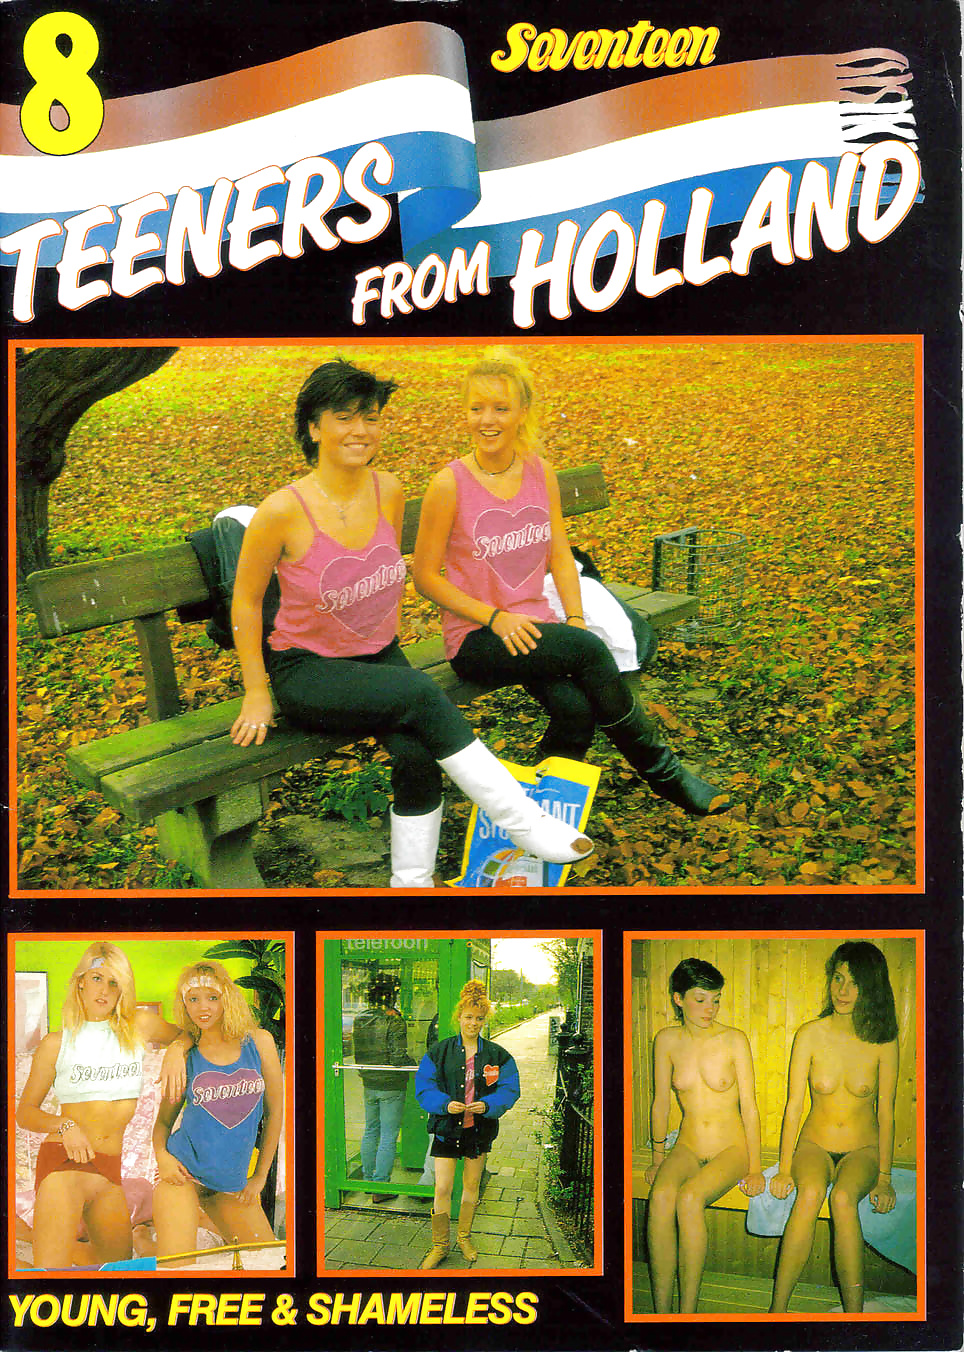 Teeners from holland #8 (revista vintage)
 #32385382